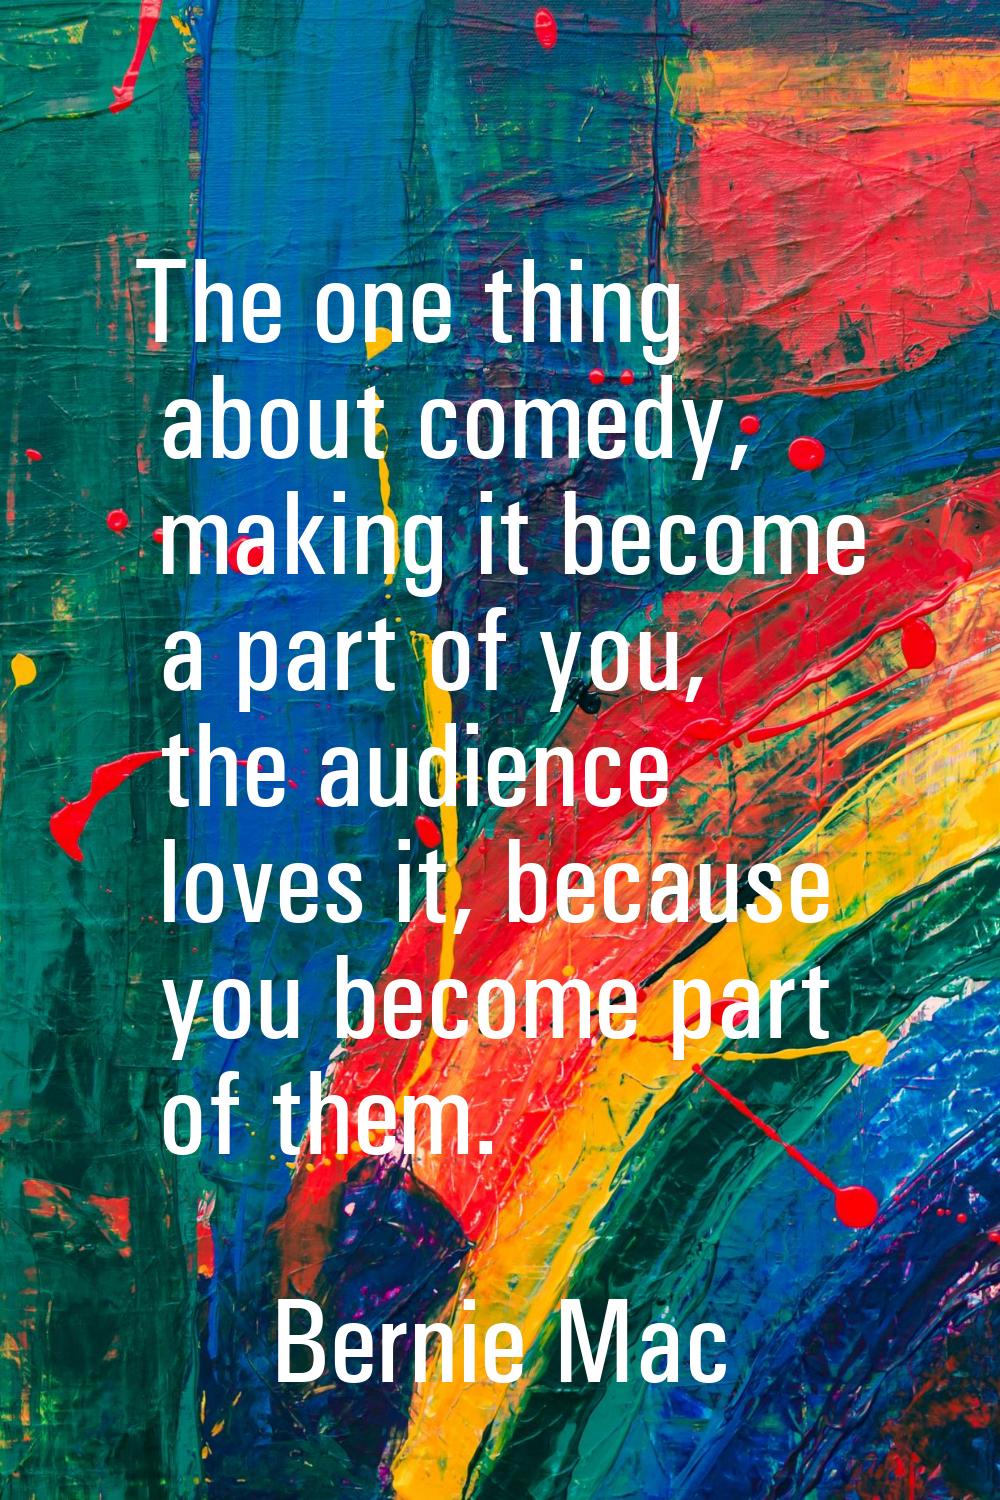 The one thing about comedy, making it become a part of you, the audience loves it, because you beco